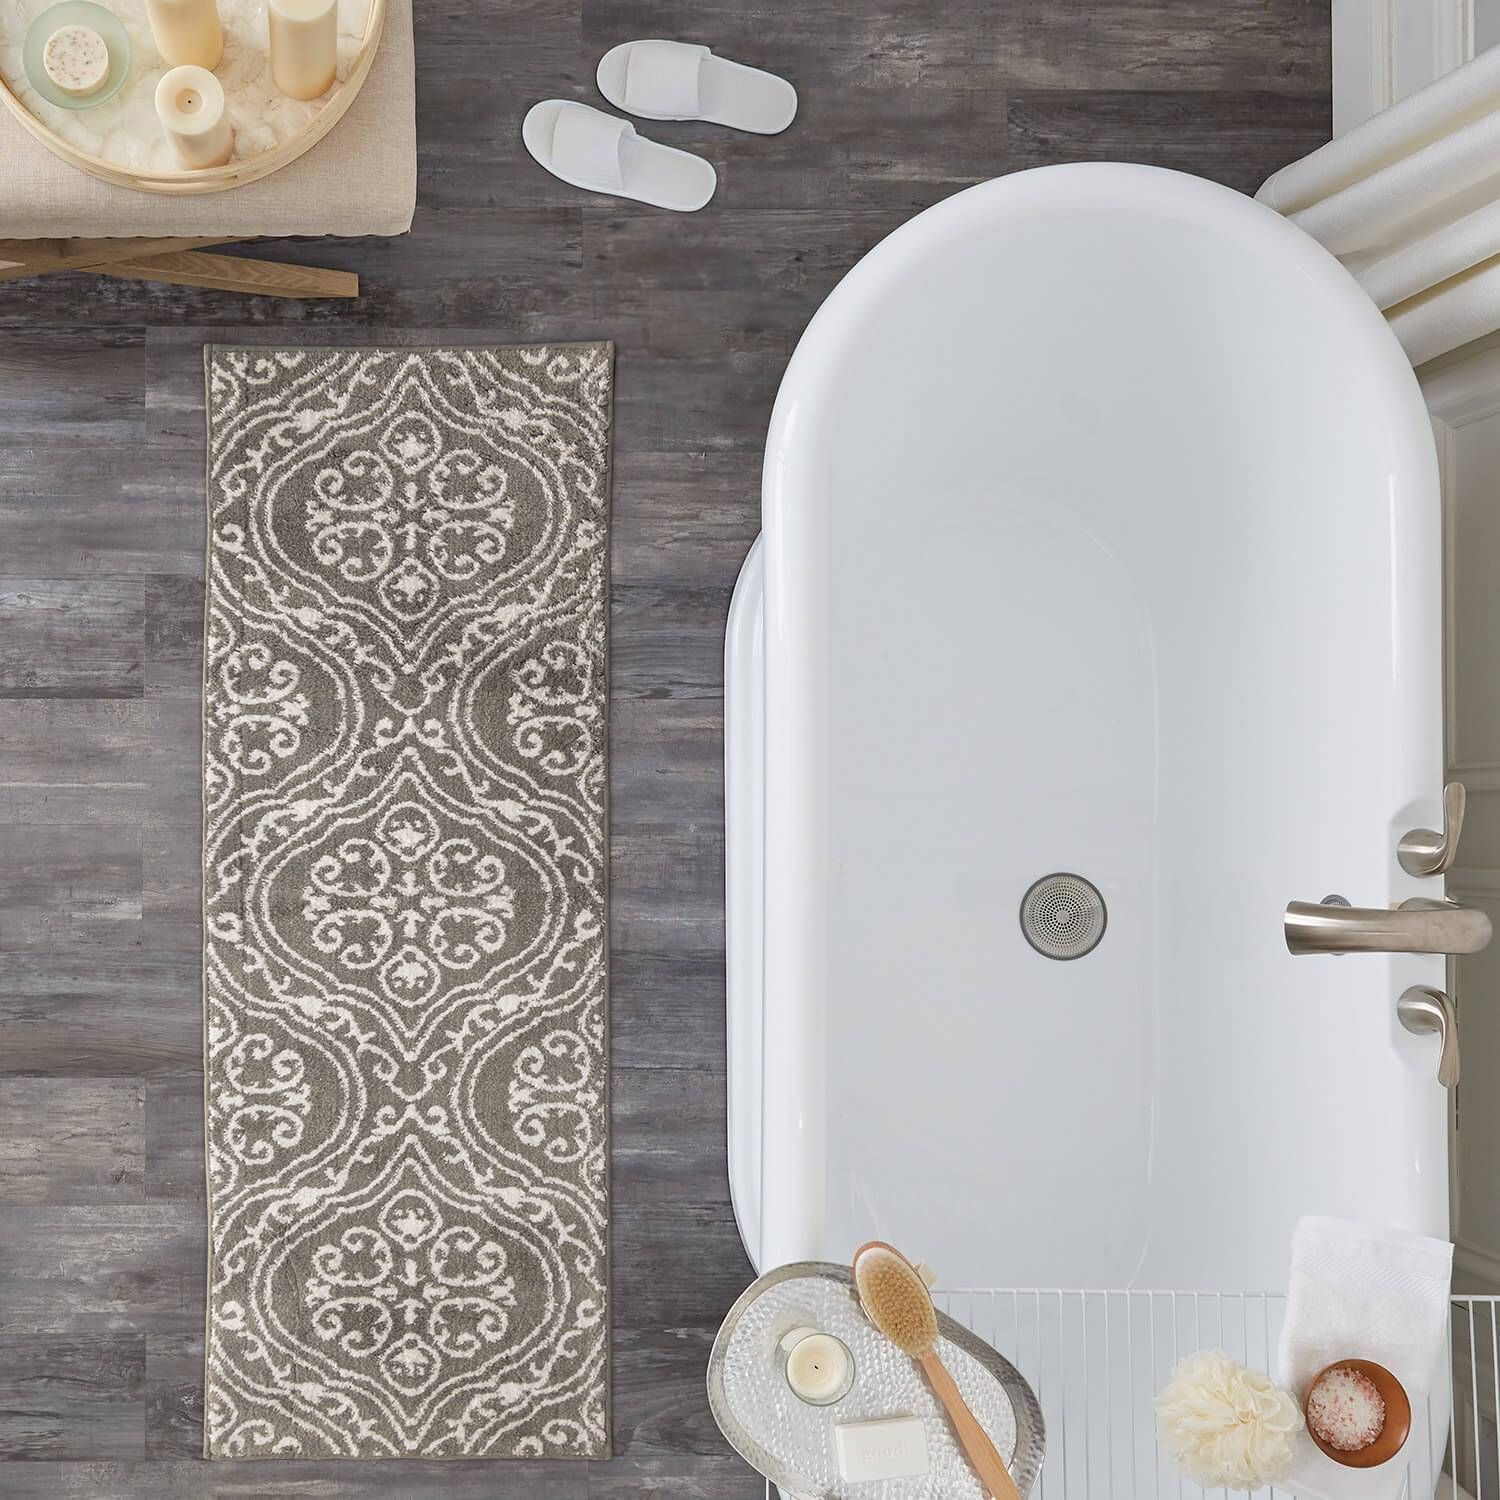 Addy home Medallion Collection 100 % cotton Non-skid Plush Bath Runner, Oversized Bath Rug - Silver Grey, 22" x 60" - image 1 of 3